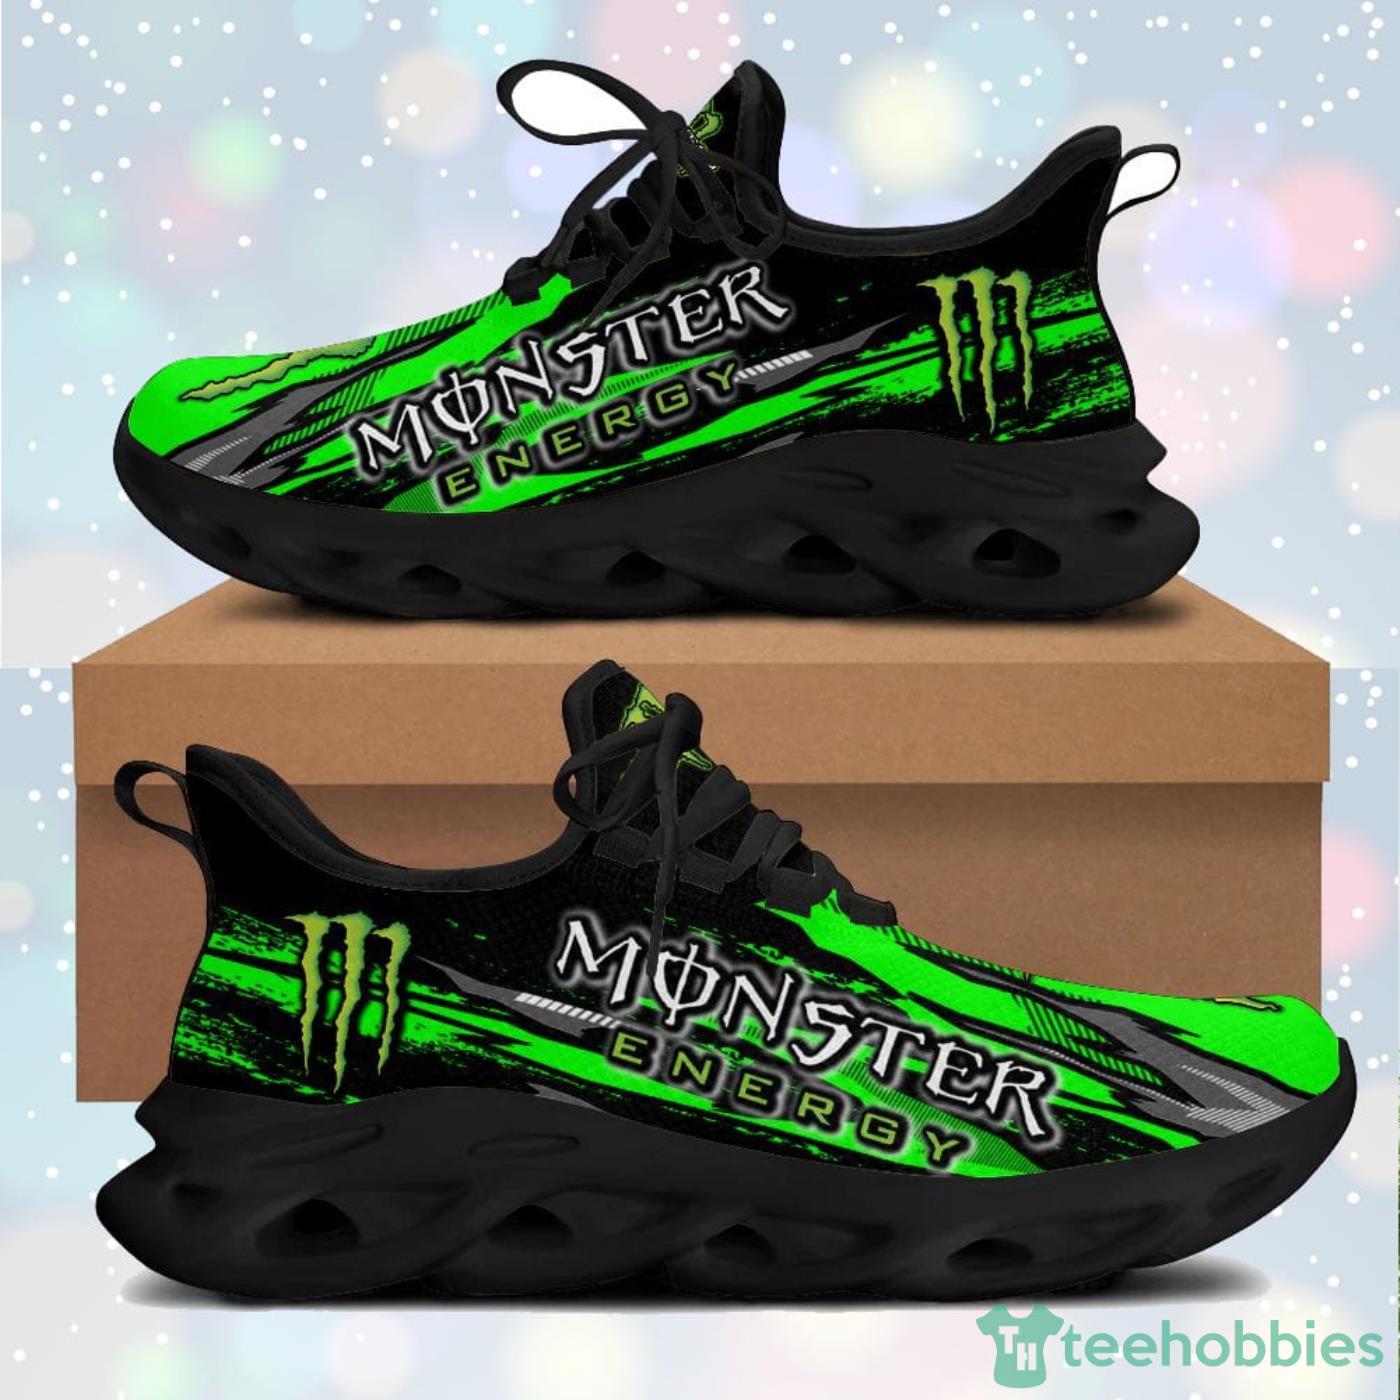 Devastar Cuna Caracterizar Top 9 Models Of Sneaker Running Shoes For Those Who Love Monster Energy